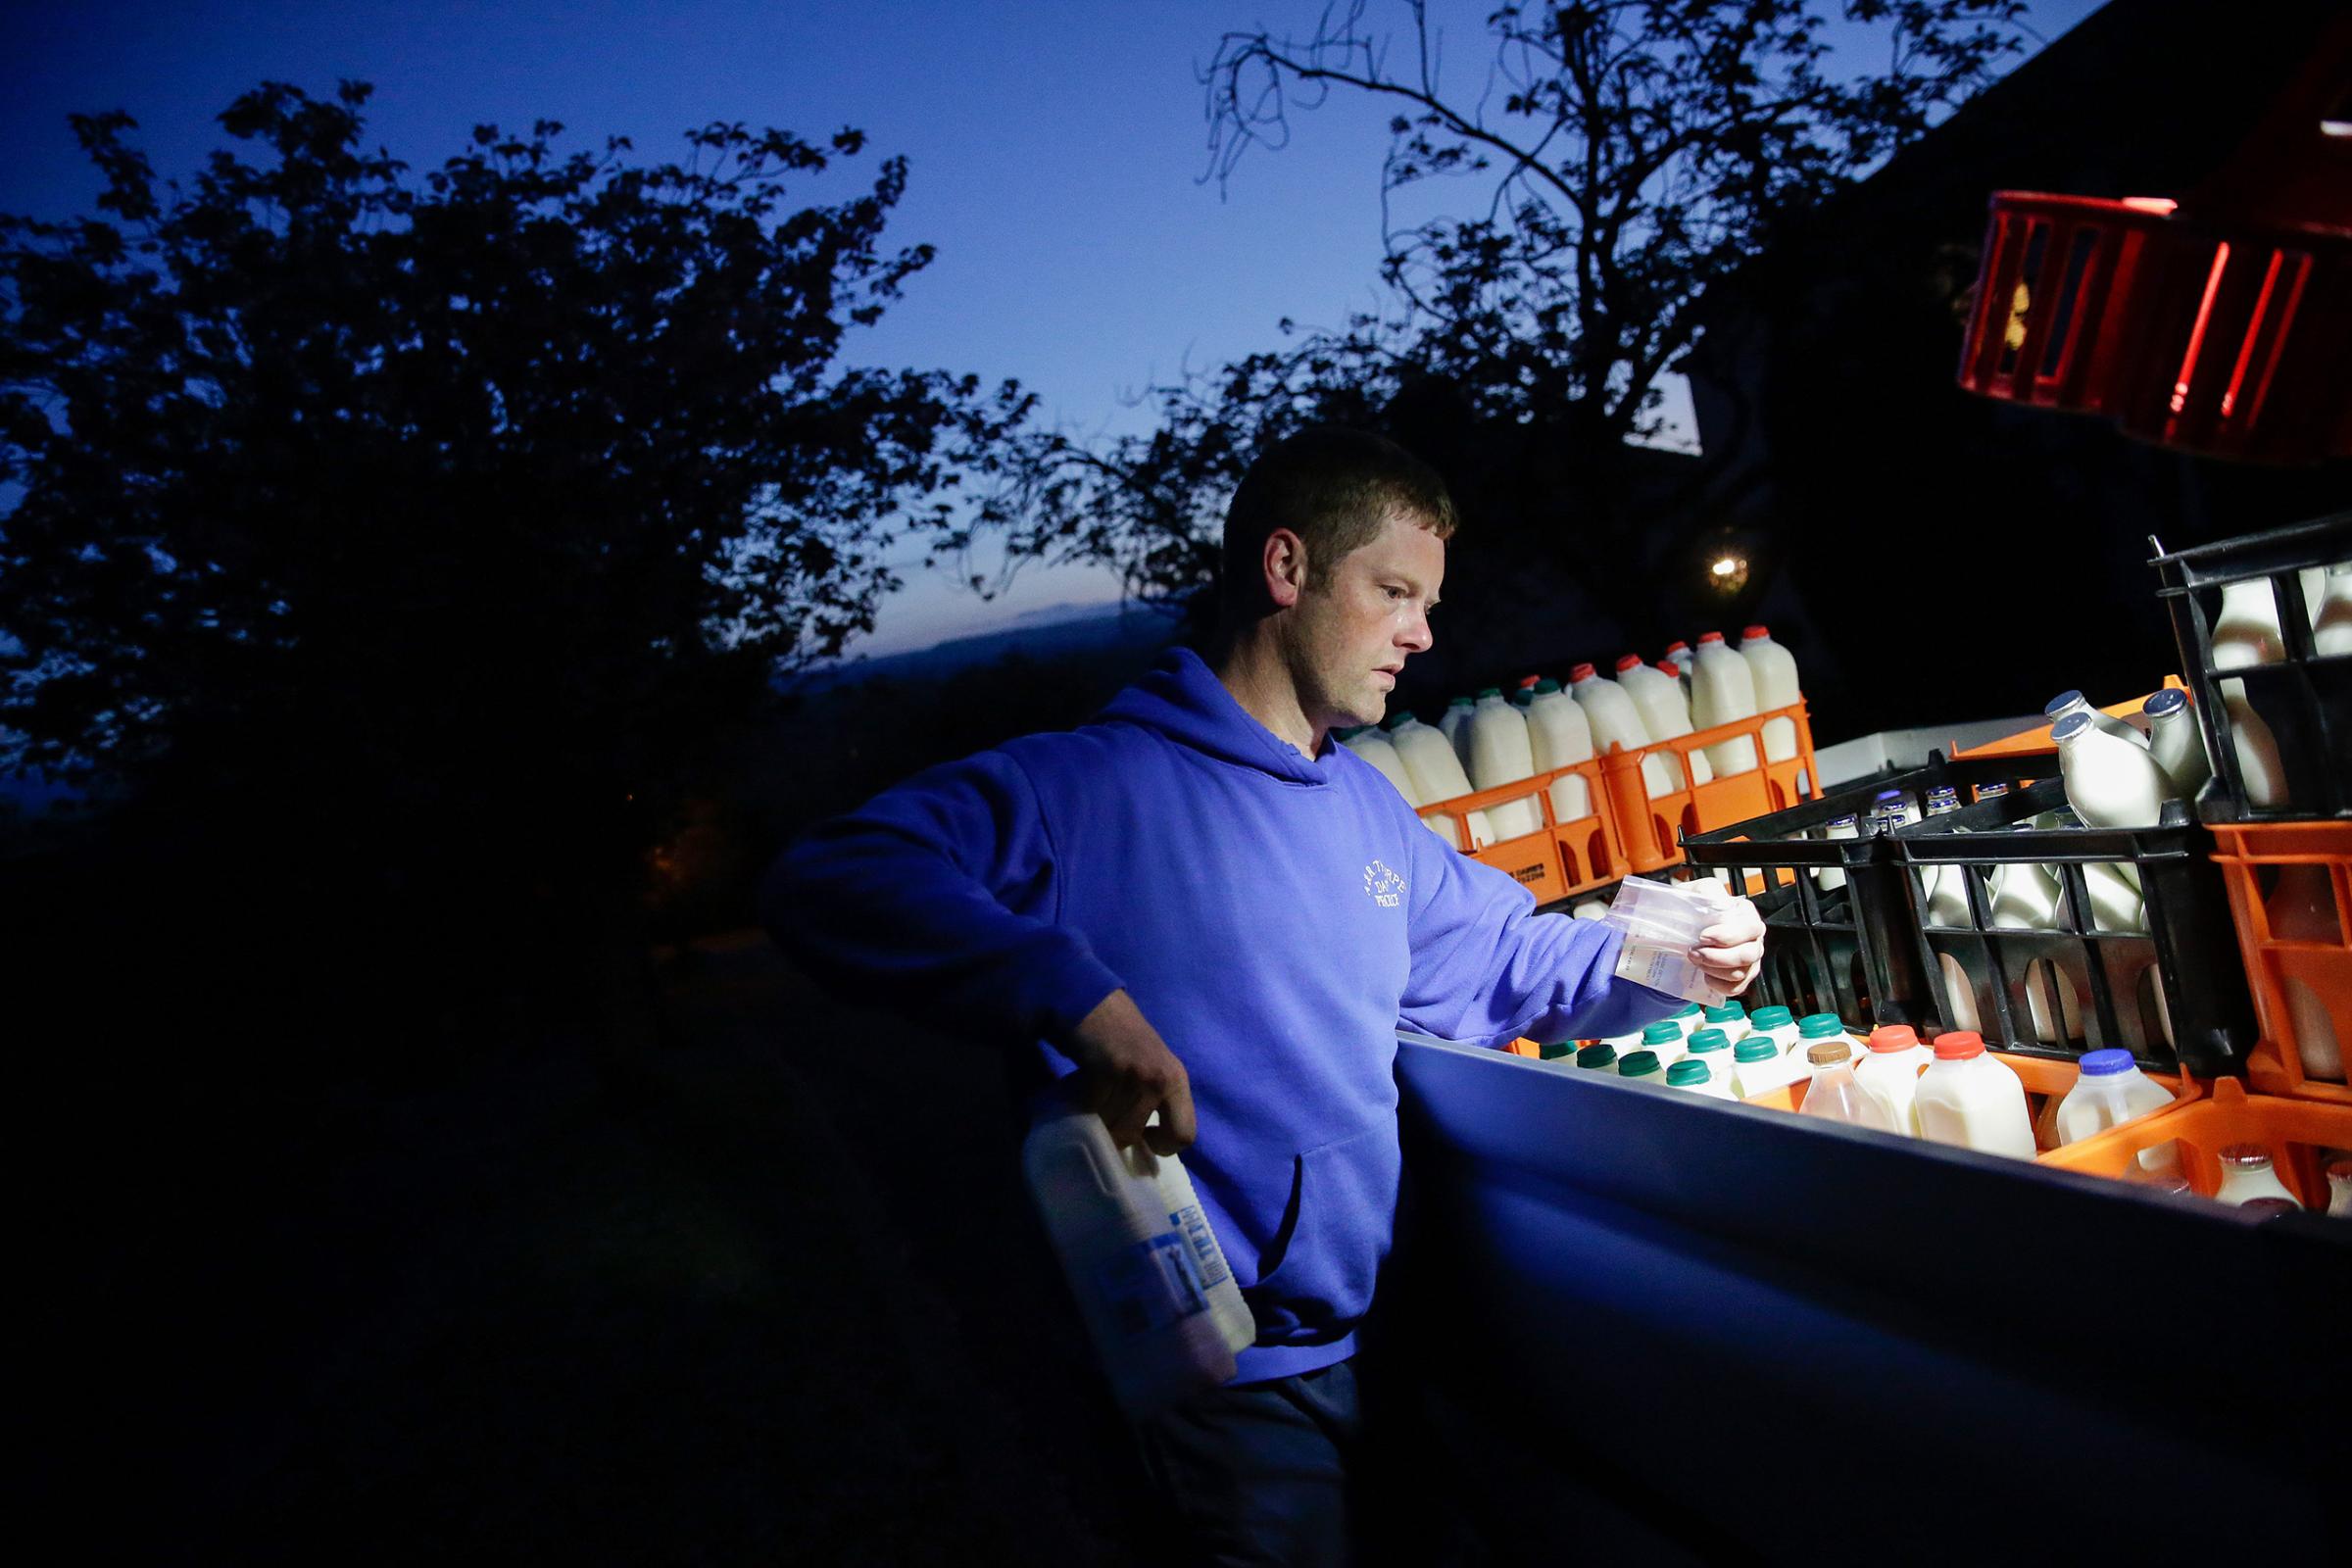 Andrew Thorpe collects milk from his van for an order during his early morning milk doorstep delivery service in Ilkley, Britain, on May 16, 2016.